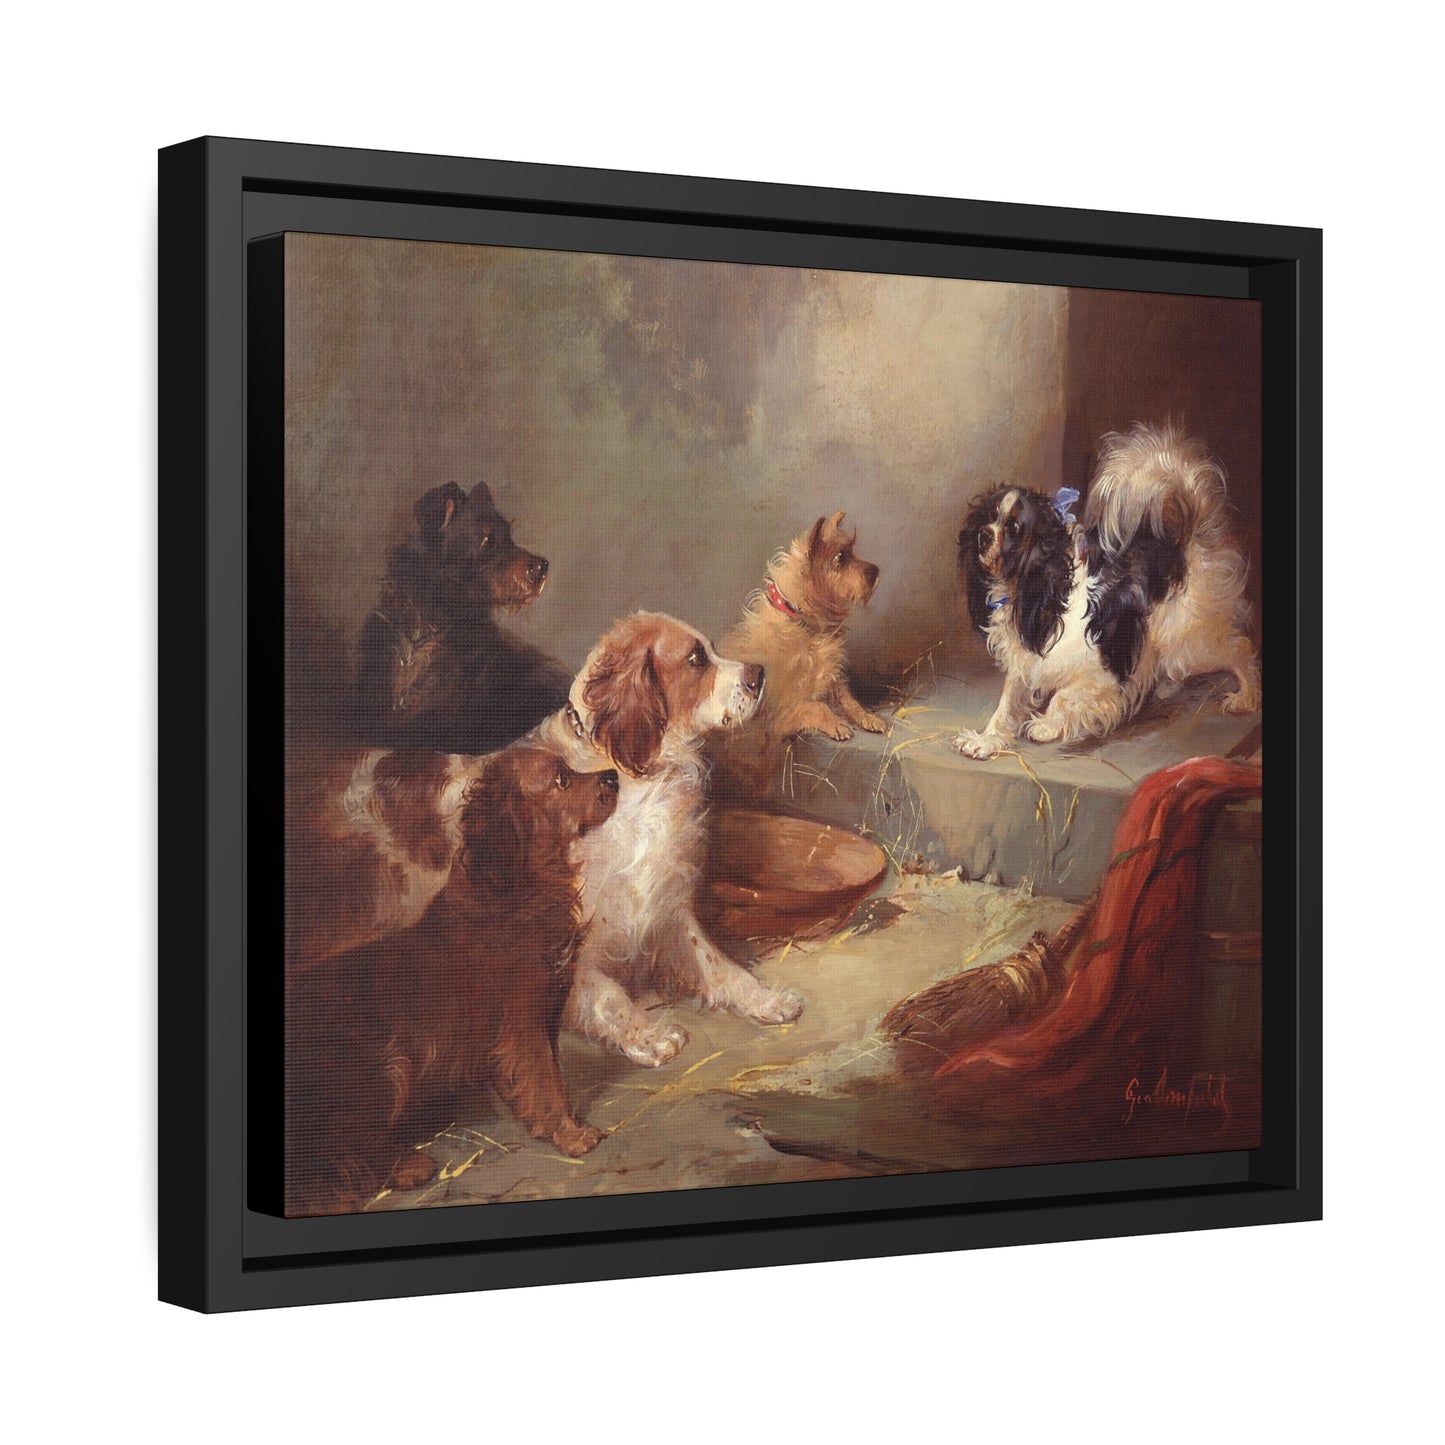 George Armfield: "The Great Debate" - Framed Canvas Reproduction